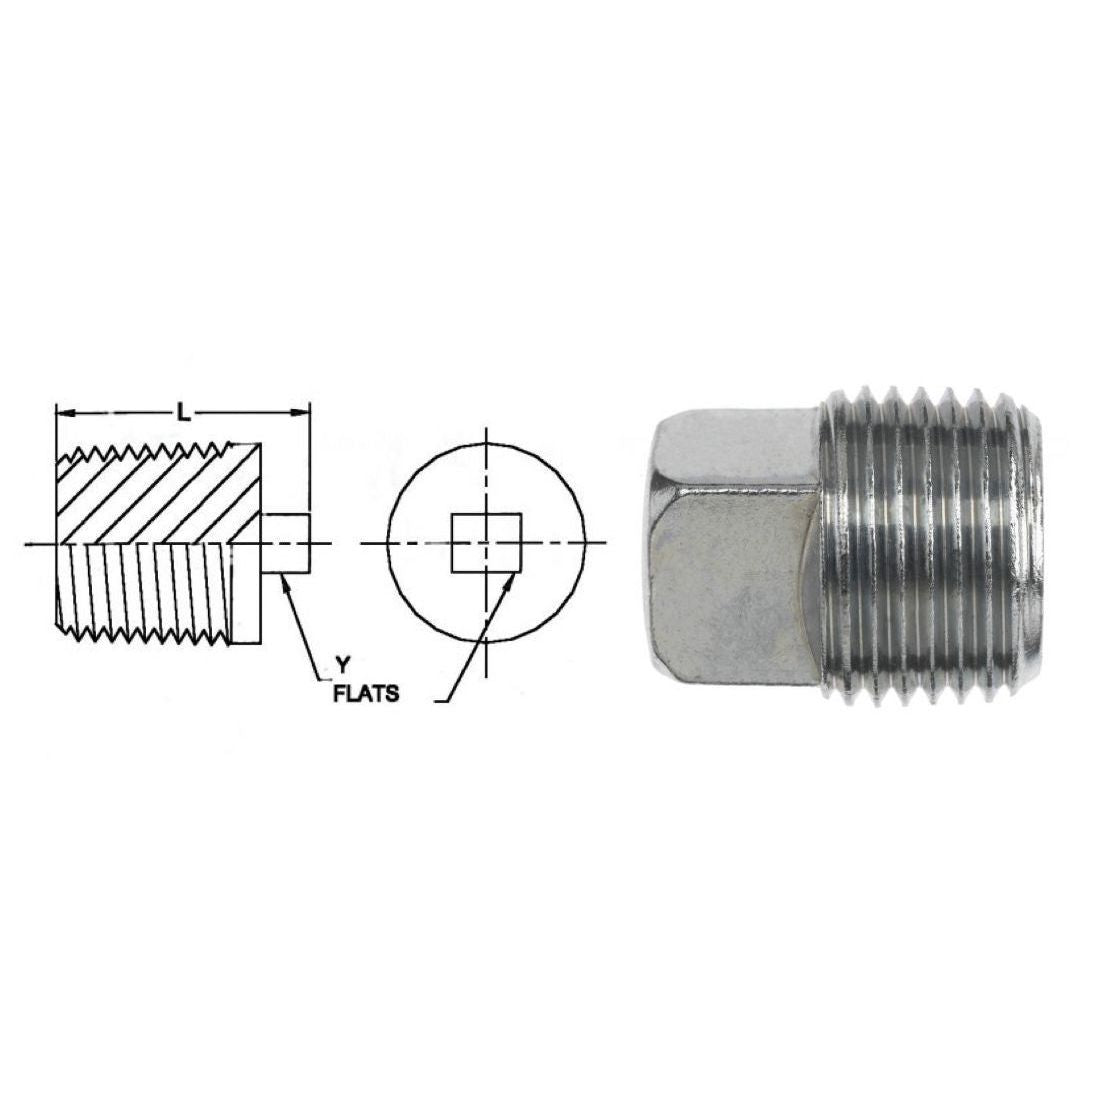 5406-SHP-24-SS : OneHydraulics Square Head Pipe Plug, 1.5 (1-1/2) Male NPT, Stainless Steel